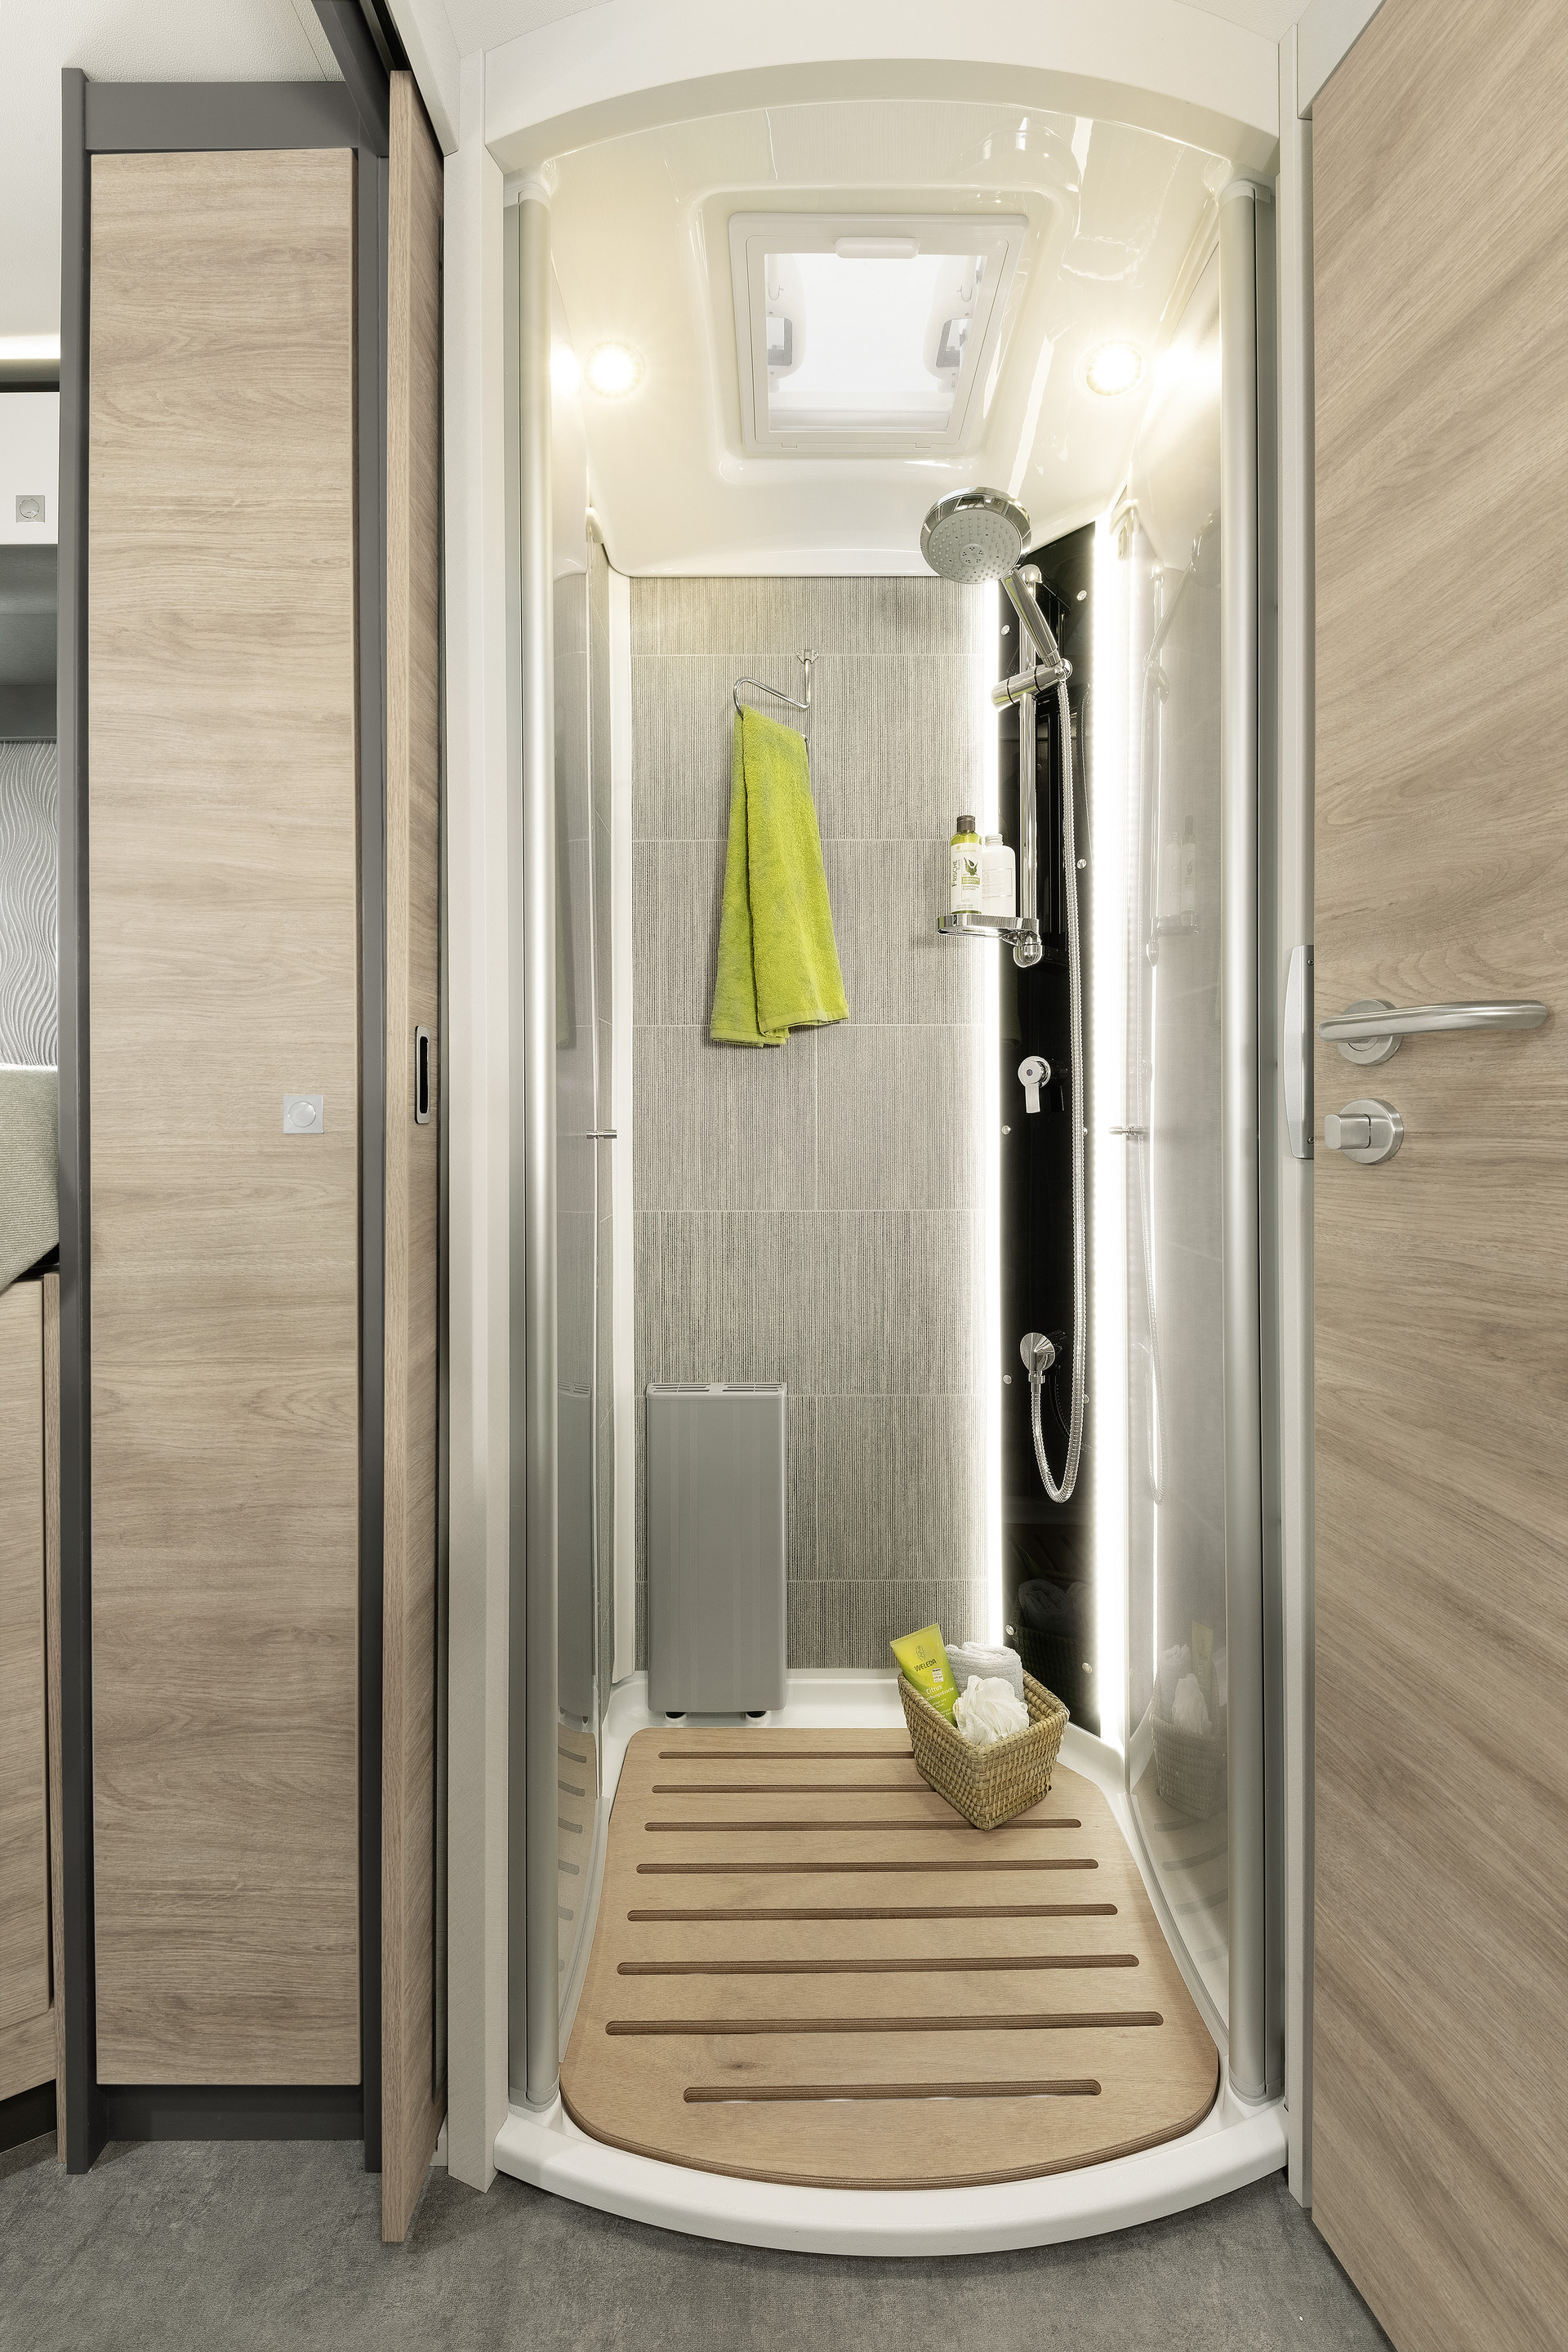 There is also plenty of space in the separate shower with backlit fittings.